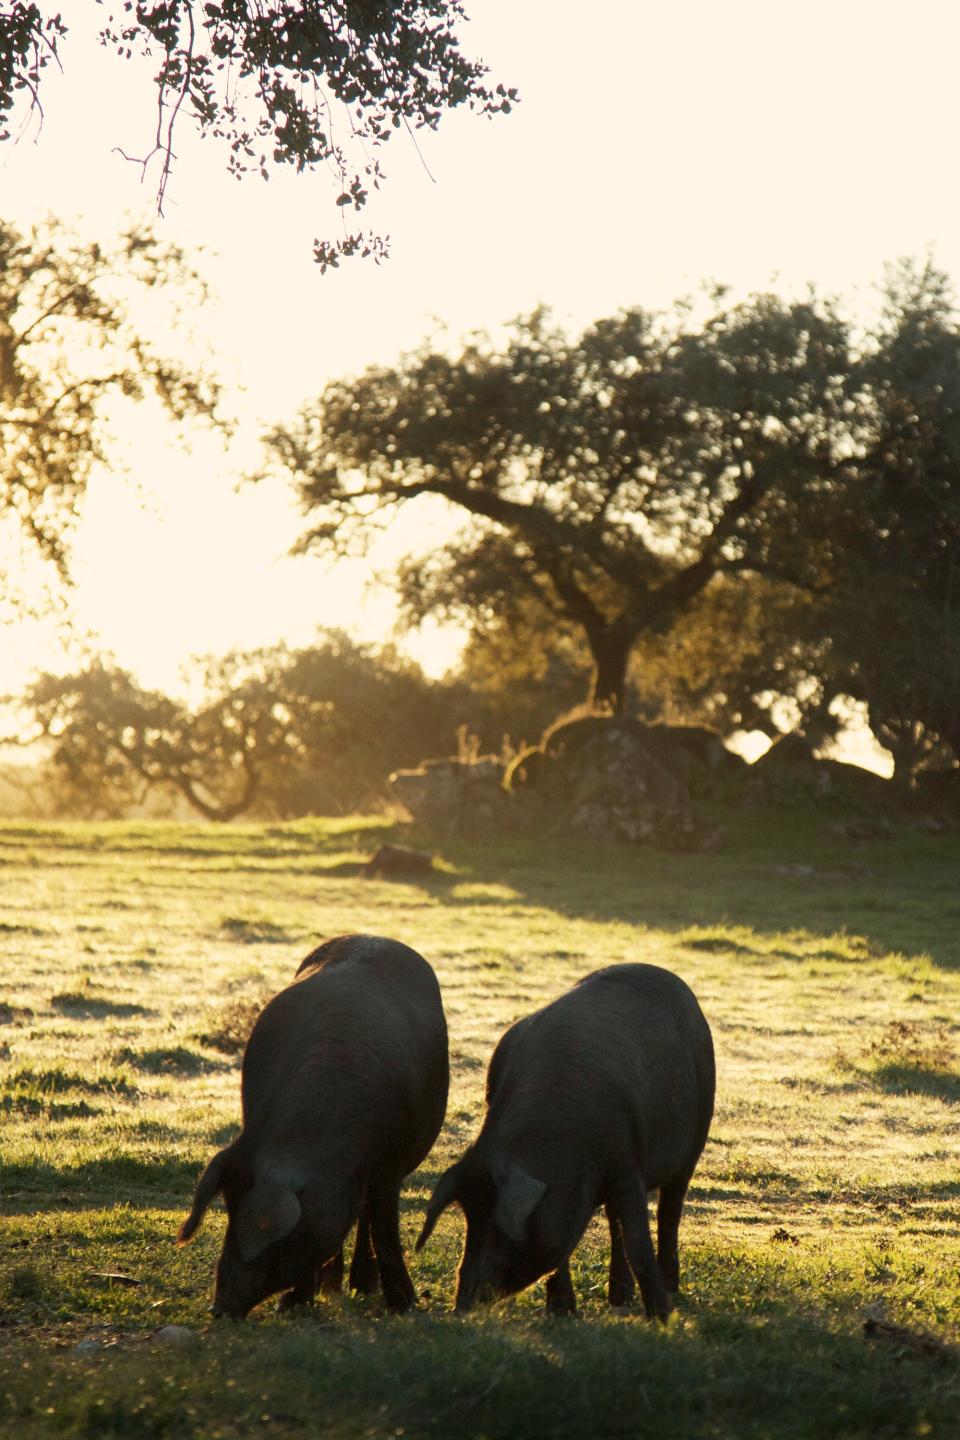 The pigs that make jamón Ibérico live in harmony among oak trees and grassland.